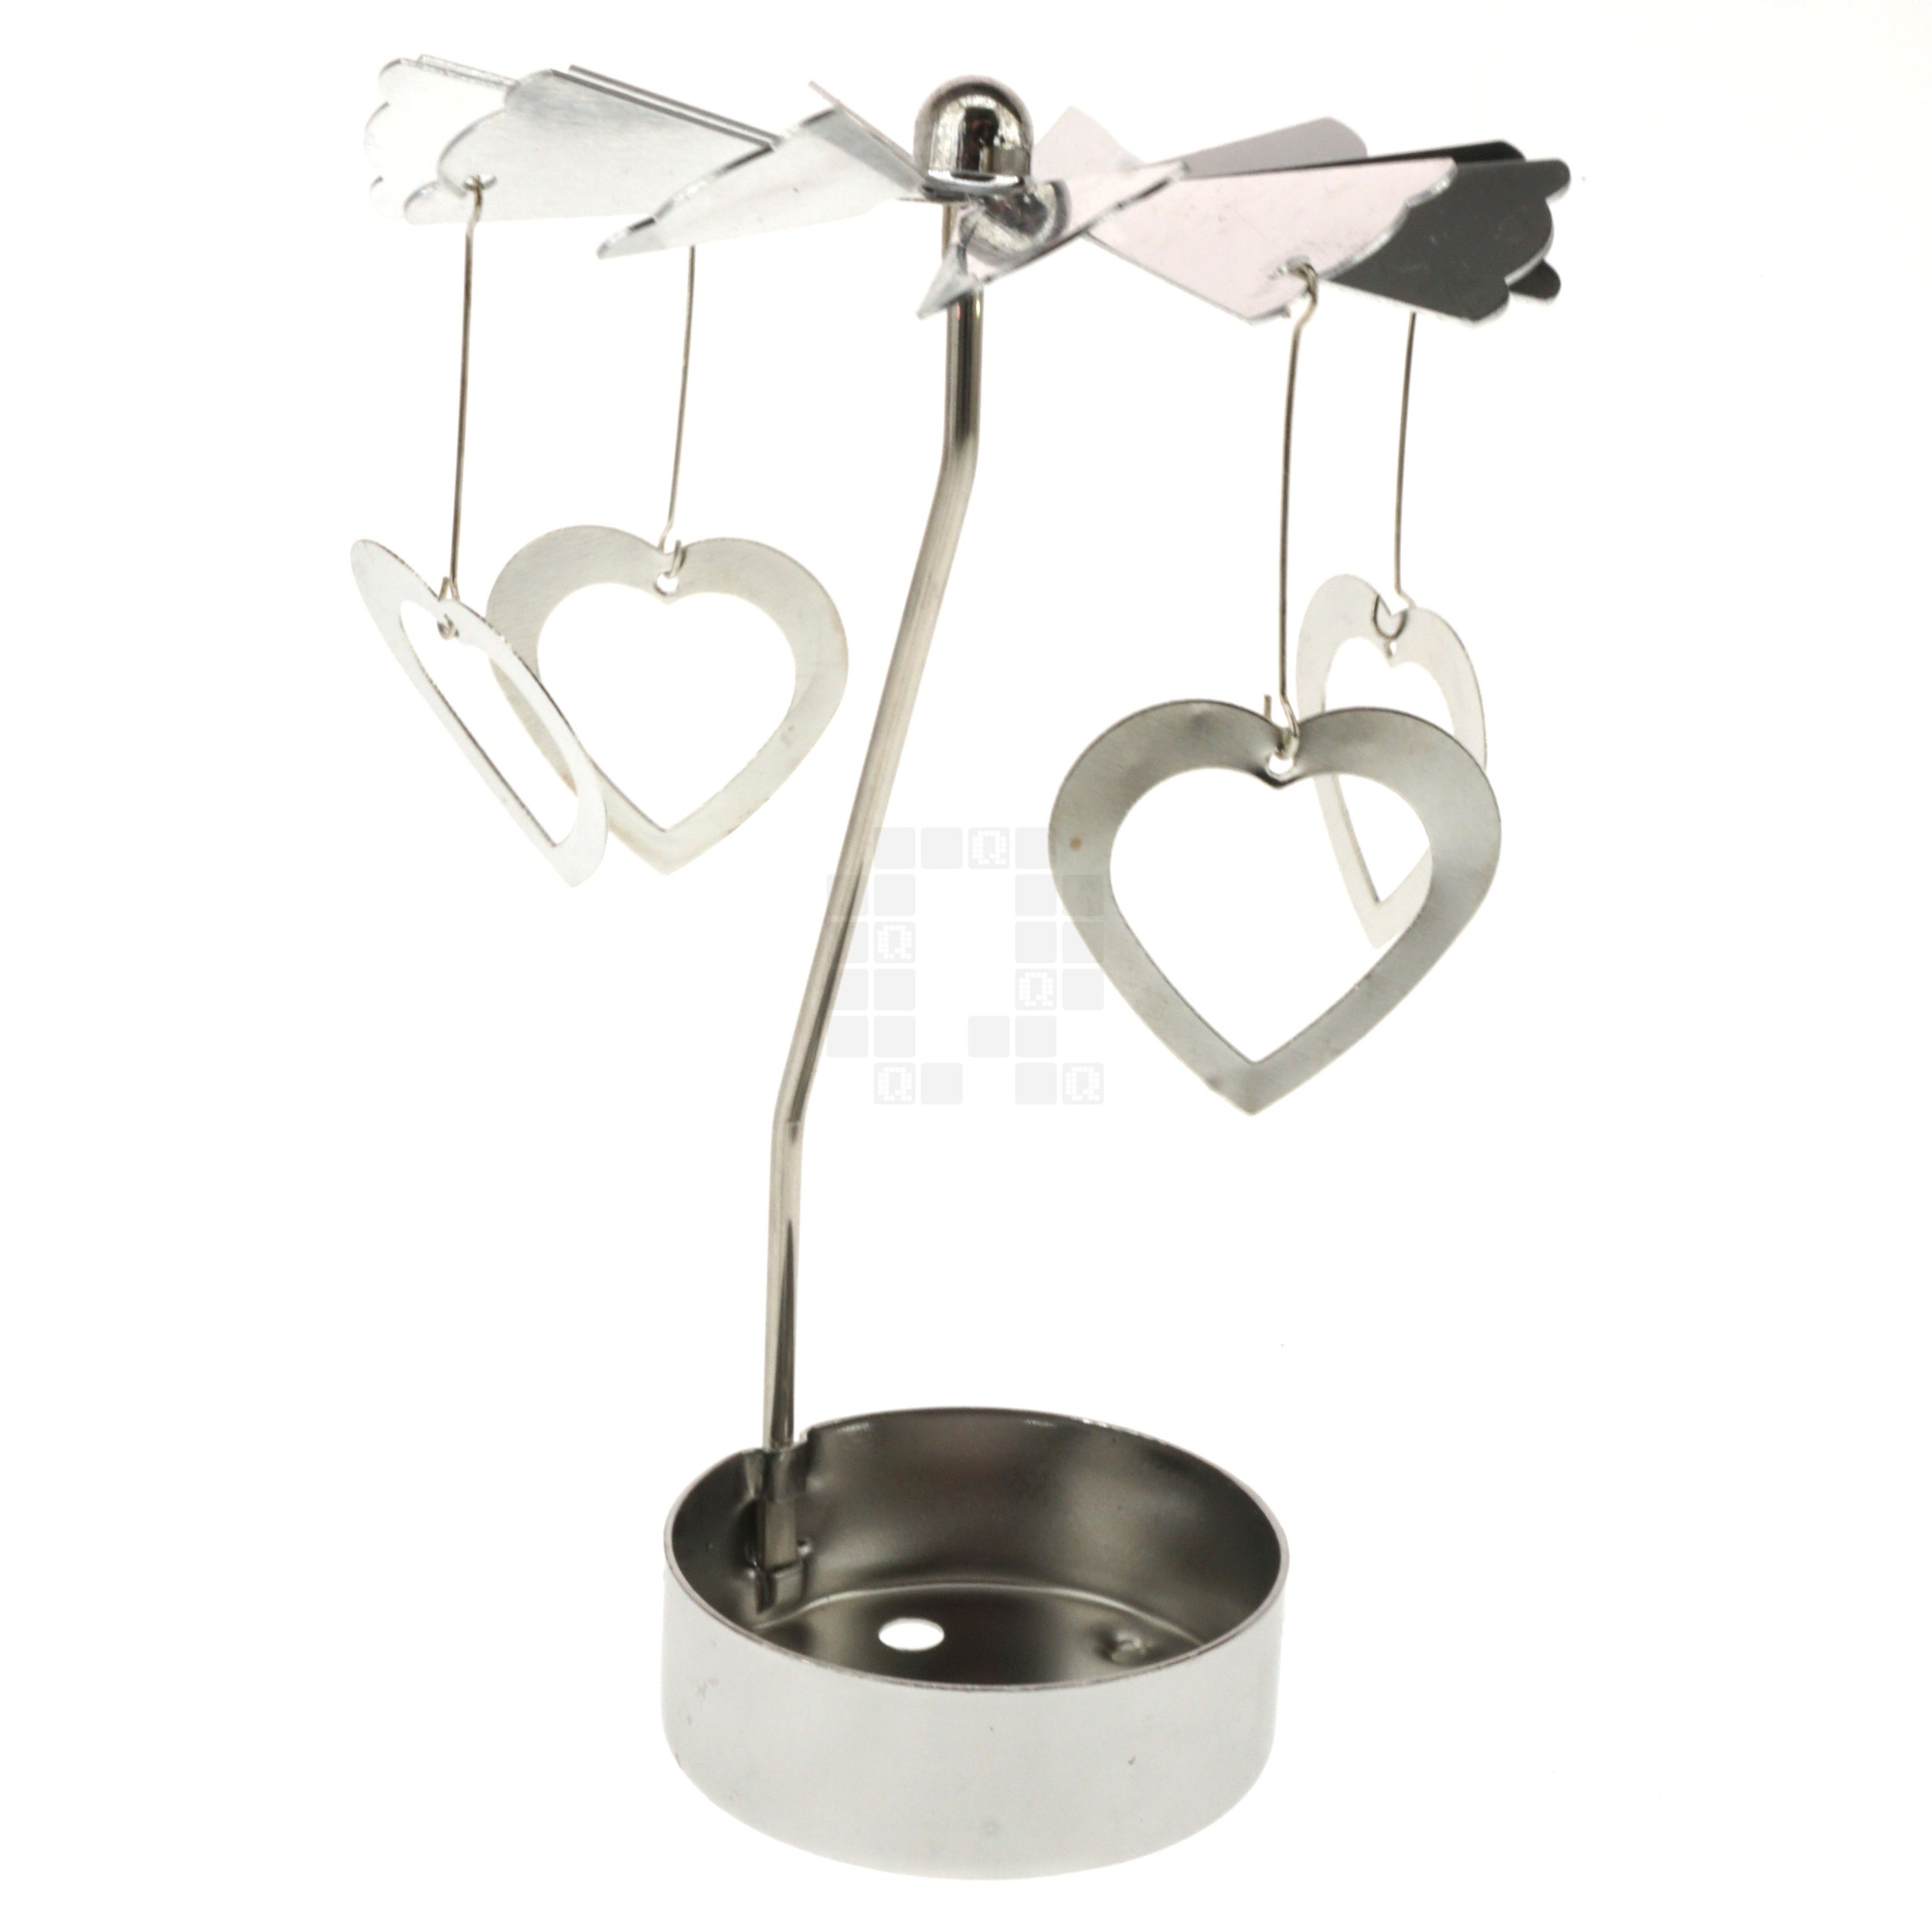 Rotary Spinning Tealight Candle Holder Carousel with Hearts